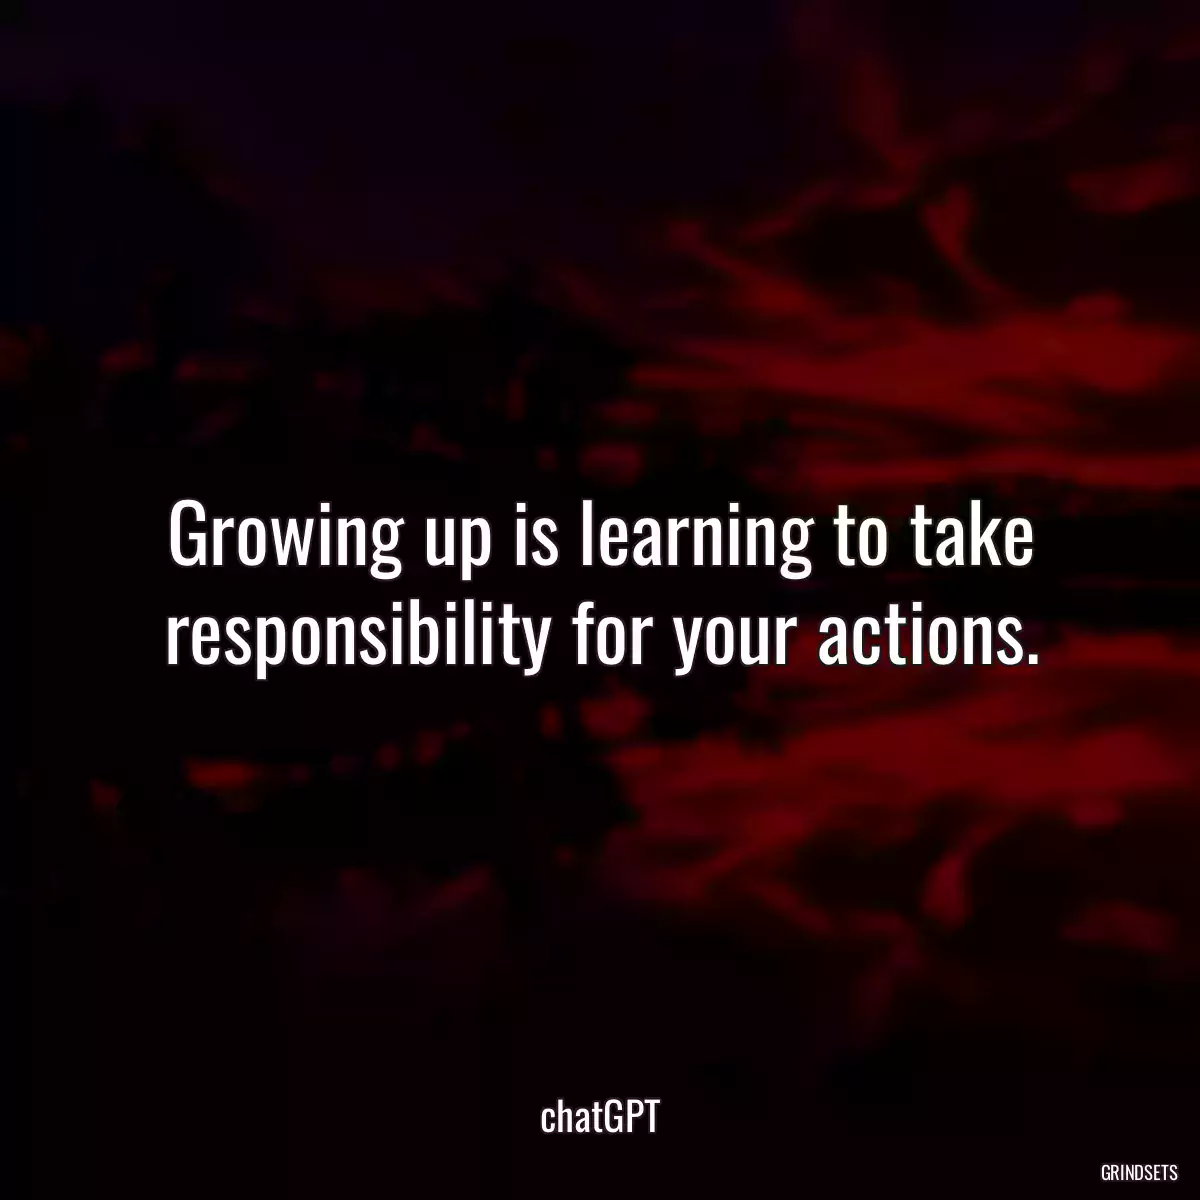 Growing up is learning to take responsibility for your actions.